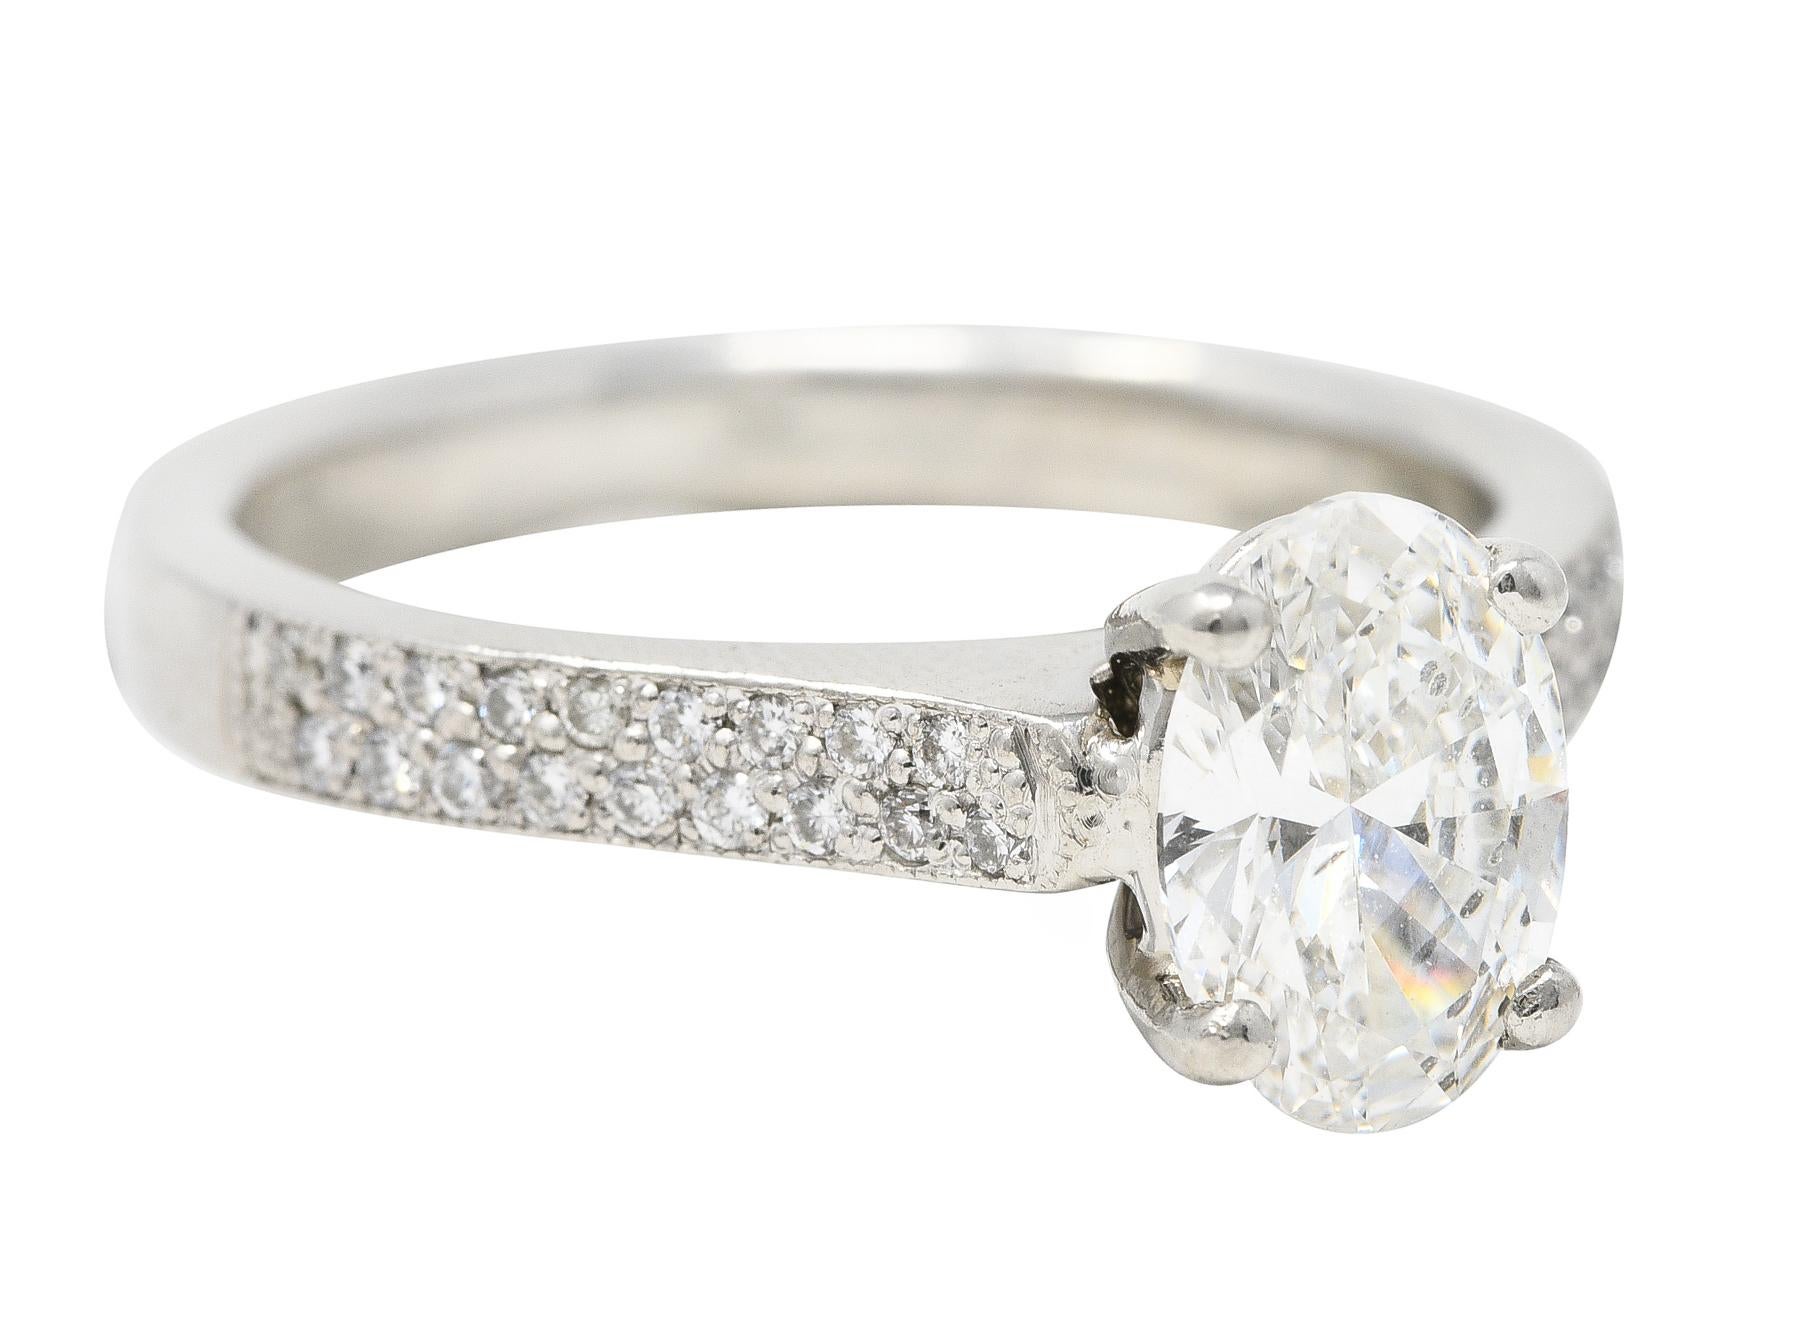 Centering an oval cut diamond weighing 1.08 carats total - F color with SI2 clarity. Prong set and flanked by sleek shoulders set with pavé set round brilliant cut diamonds. Weighing approximately 0.18 carat total - eye clean and bright. Stamped